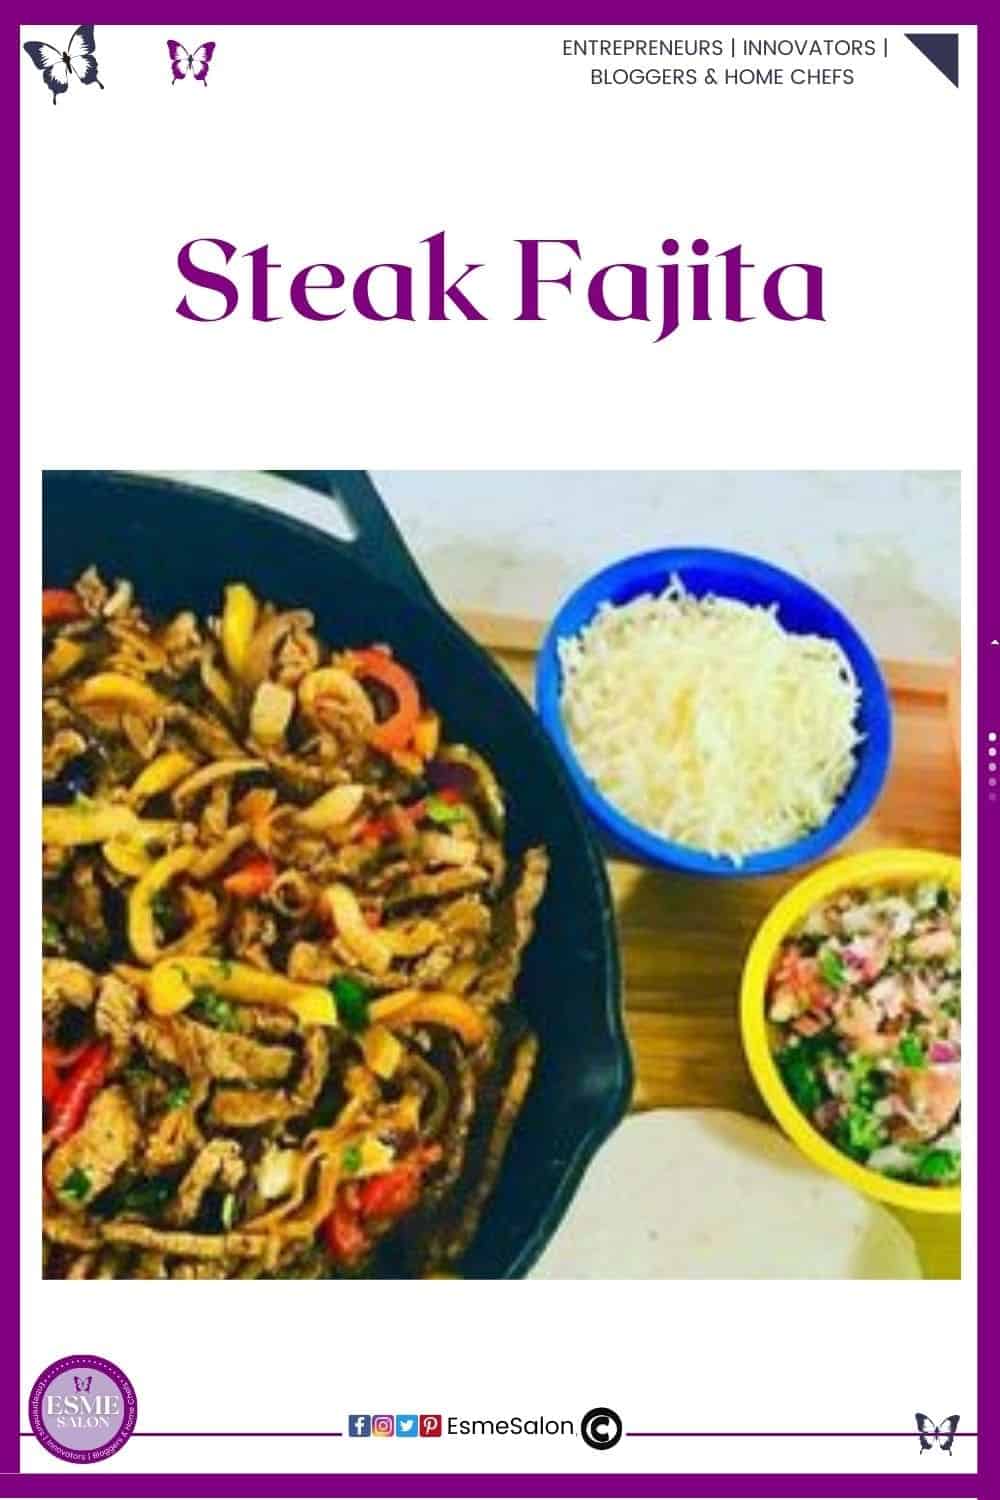 an image of Steak Fajitas in a pan cast iron pan with 3 bowls of trimmings and wraps on the side